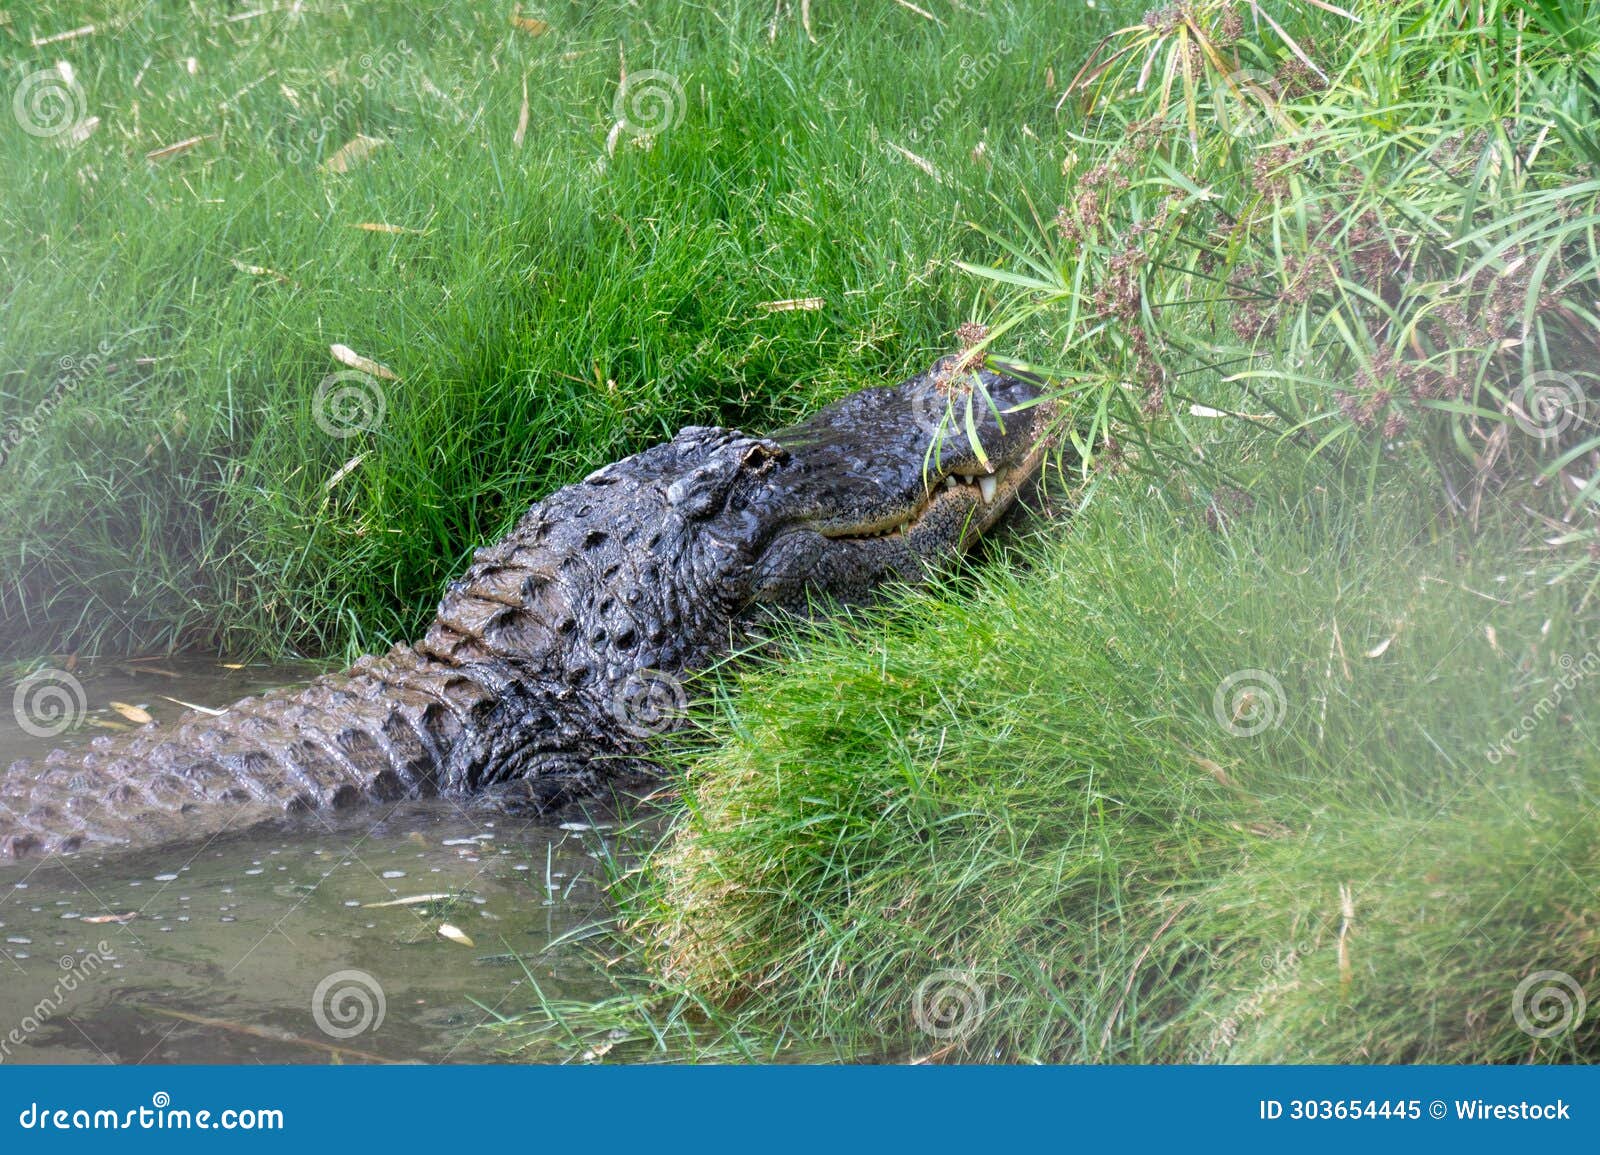 closeup of an alligator rests in a small body of water near a grassy bankside